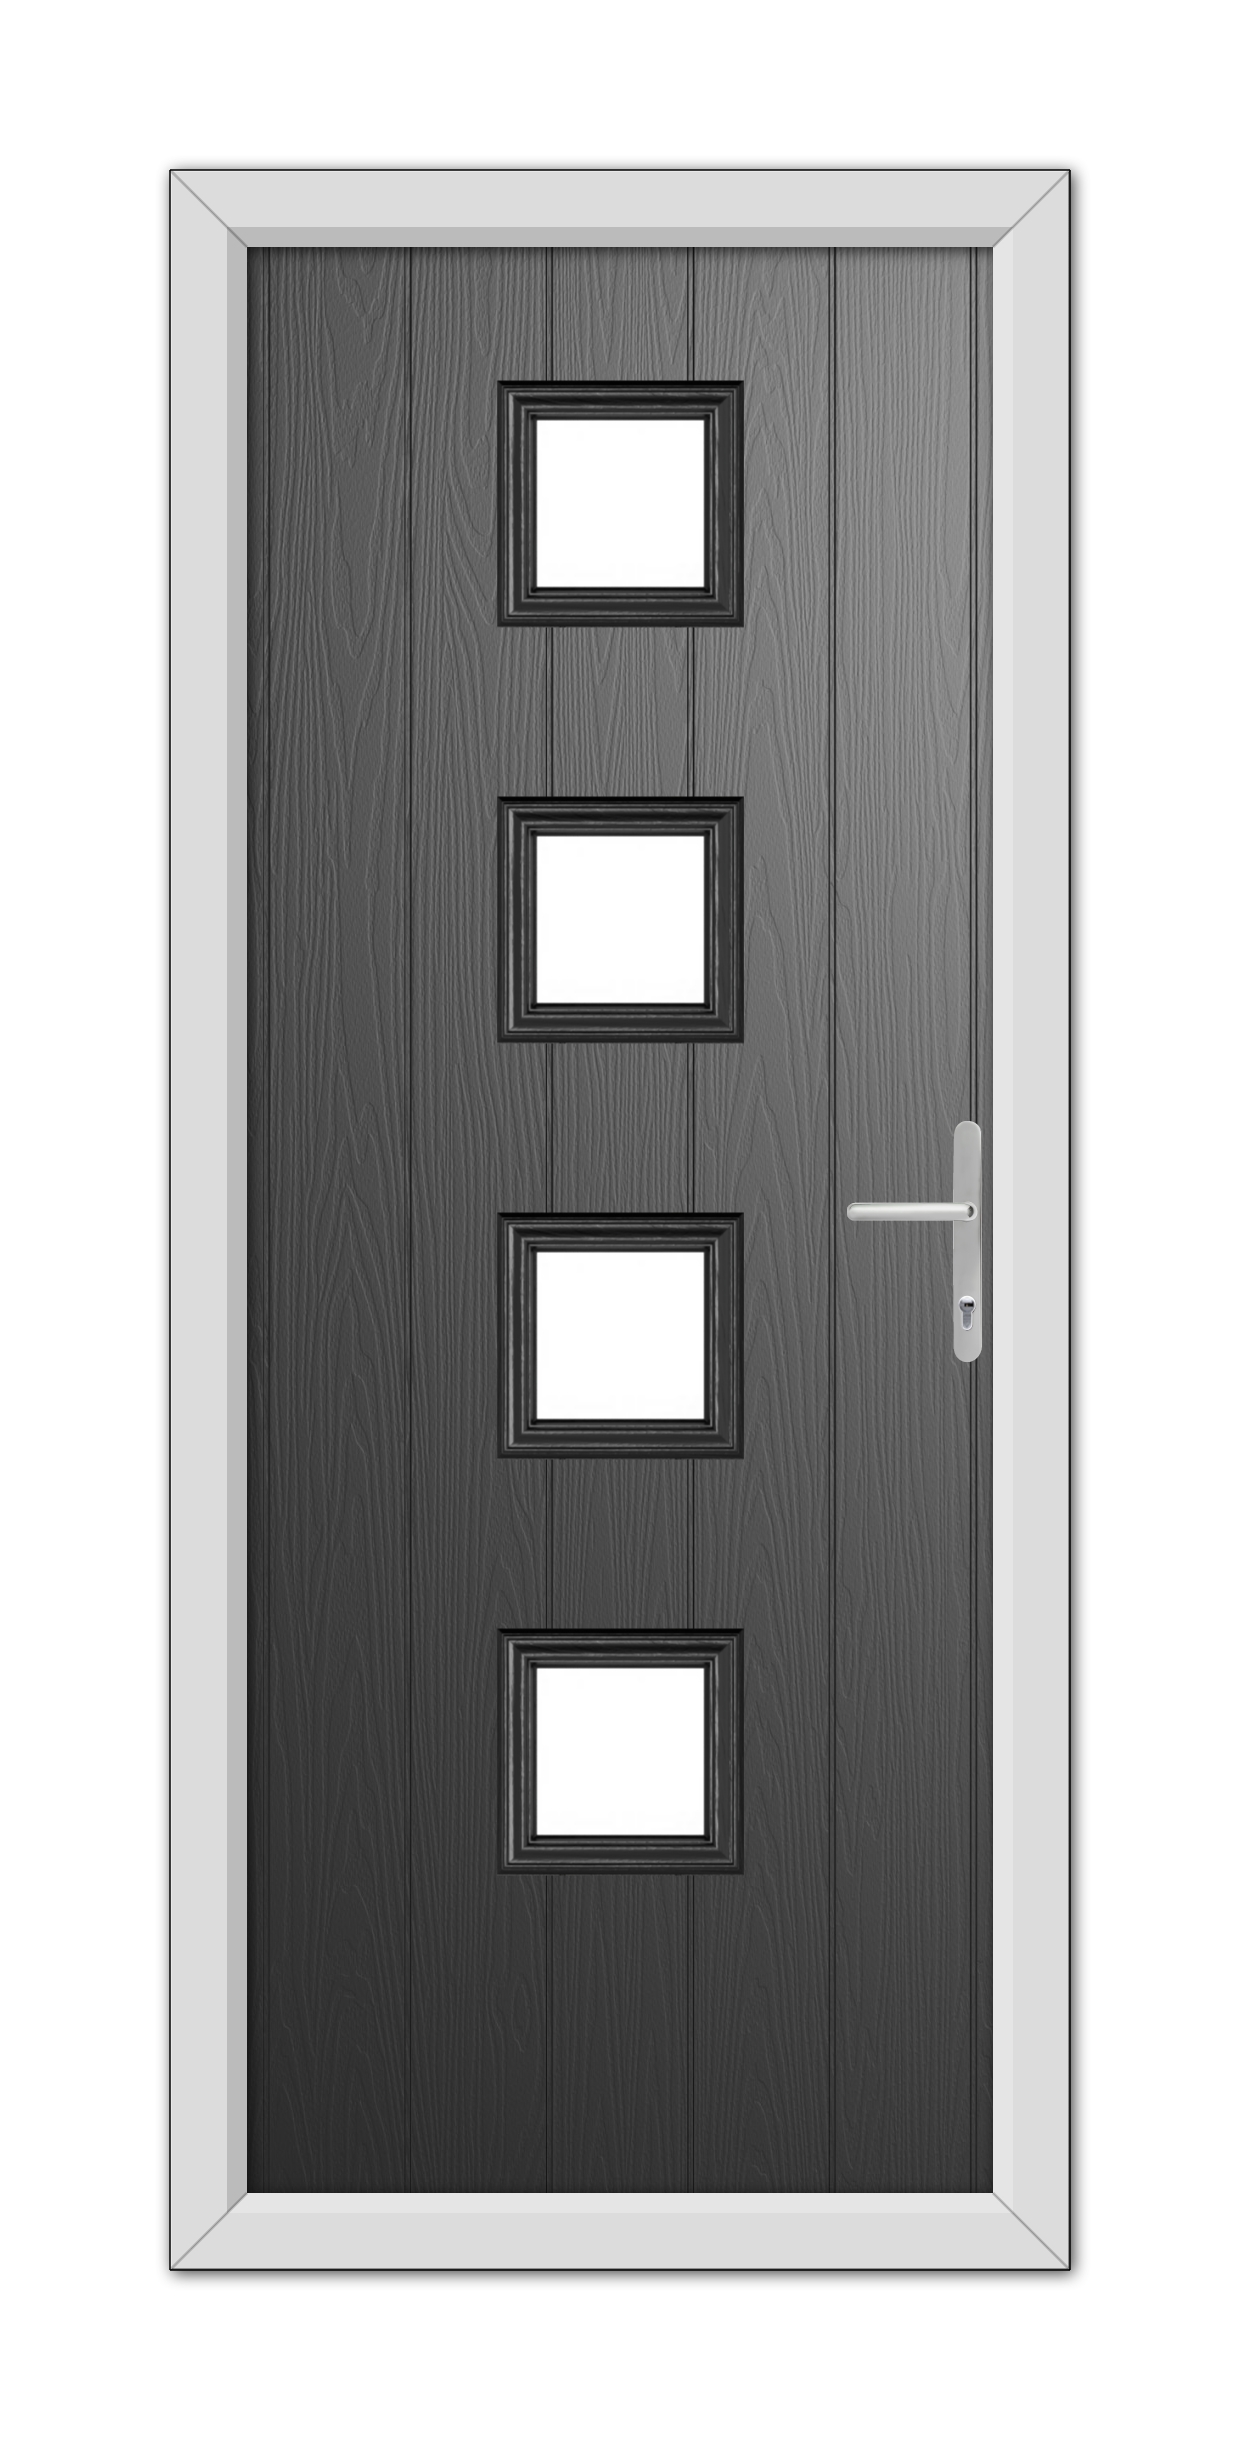 A modern Black Hamilton Composite Door 48mm Timber Core with four rectangular glass panels and a metallic handle, set within a white frame.